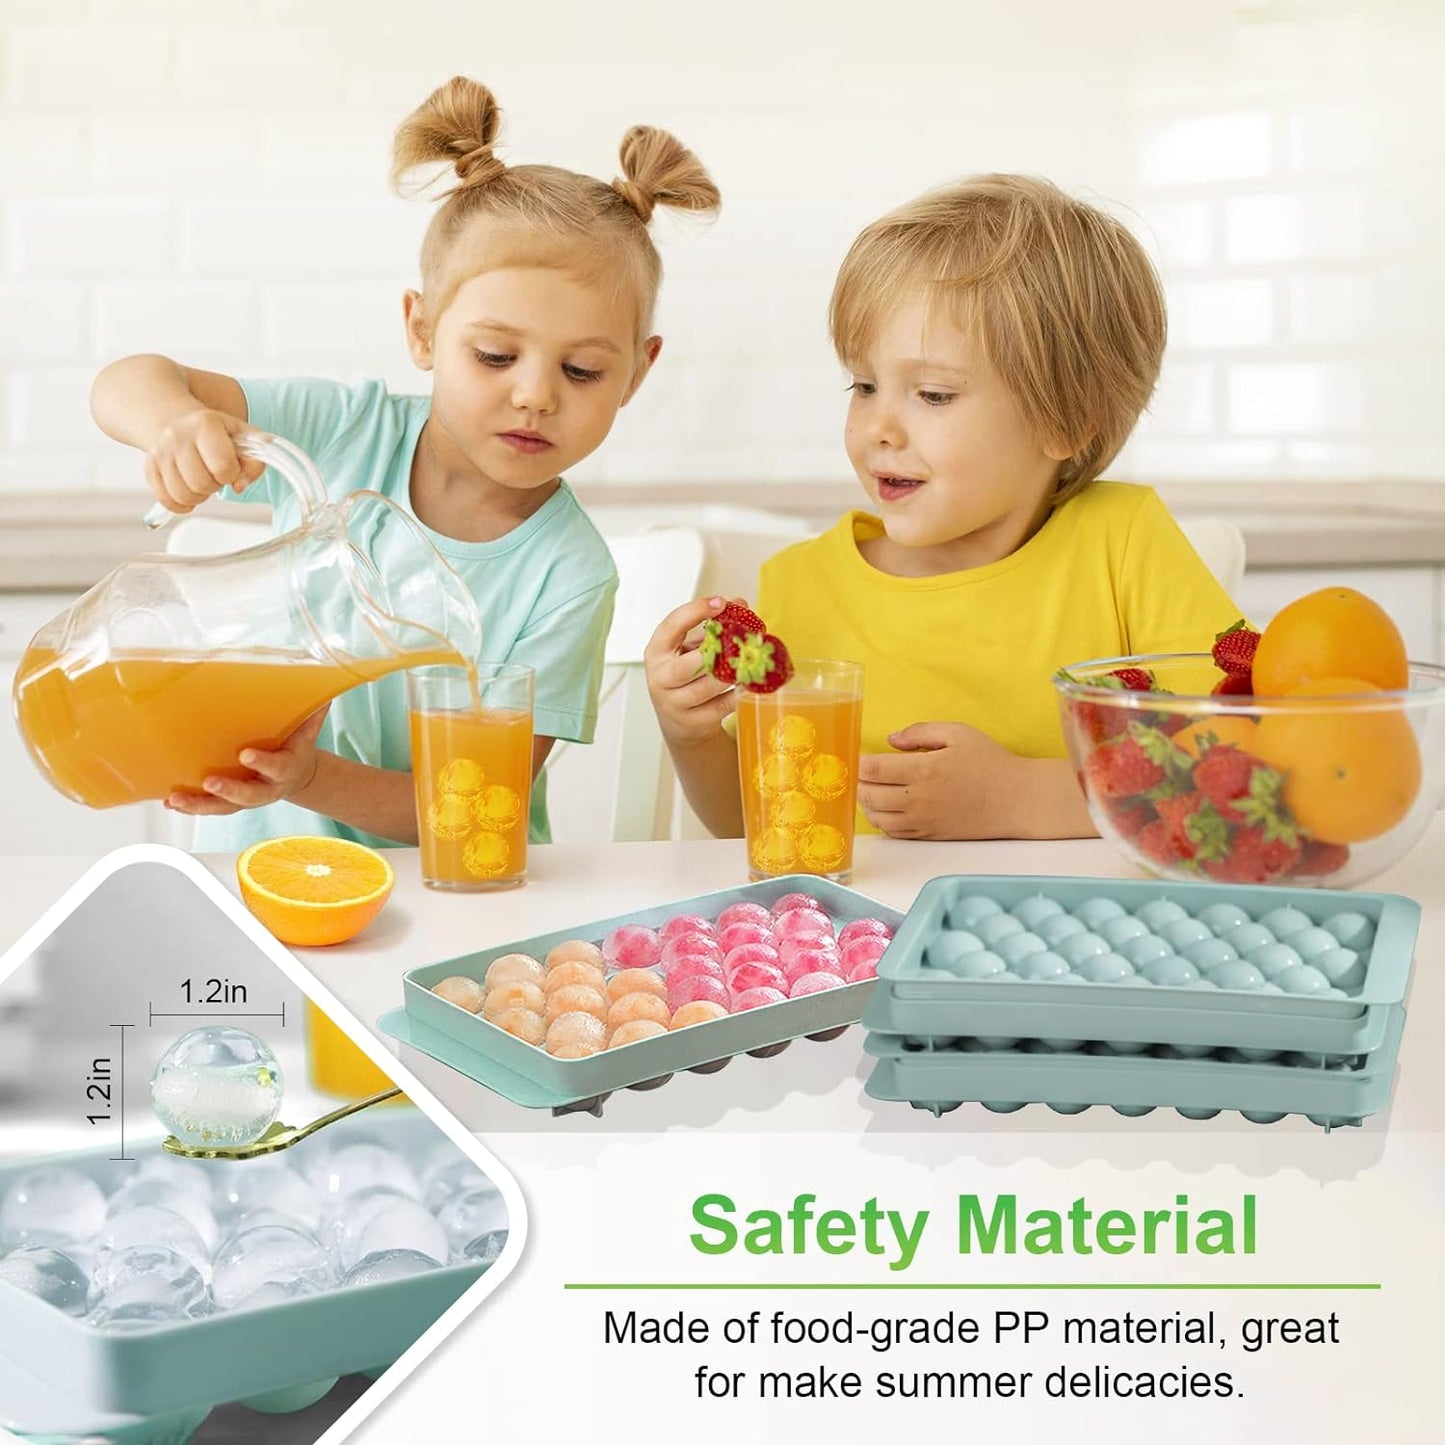 Three Ice Cube Trays 99 Ice Balls Includes Sealed Container With Tong And Scoop - RLO Tech